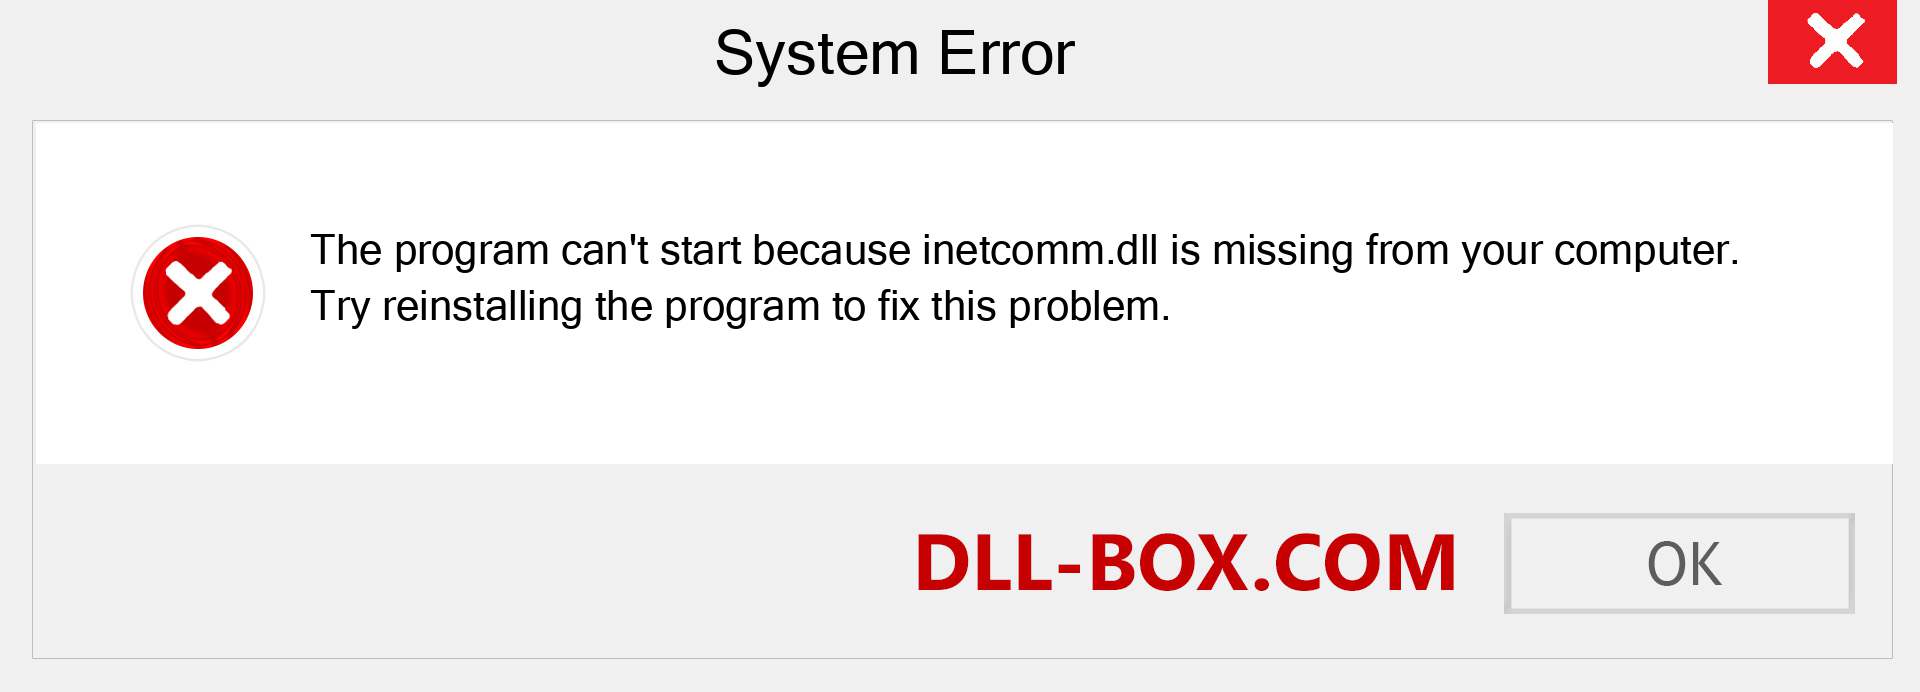  inetcomm.dll file is missing?. Download for Windows 7, 8, 10 - Fix  inetcomm dll Missing Error on Windows, photos, images